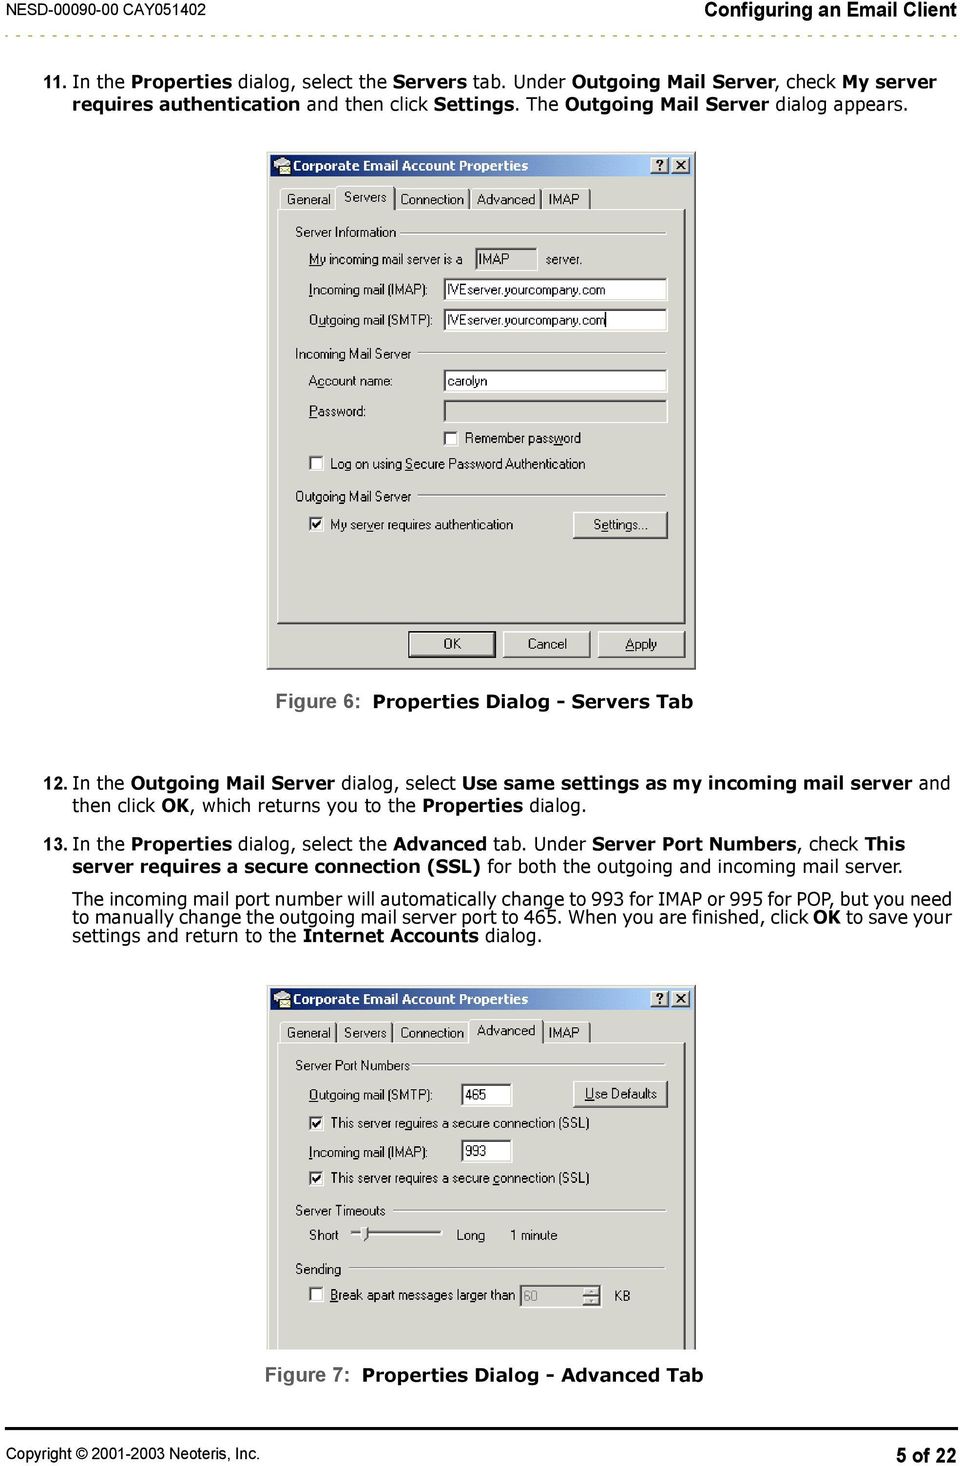 In the Properties dialog, select the Advanced tab. Under Server Port Numbers, check This server requires a secure connection (SSL) for both the outgoing and incoming mail server.